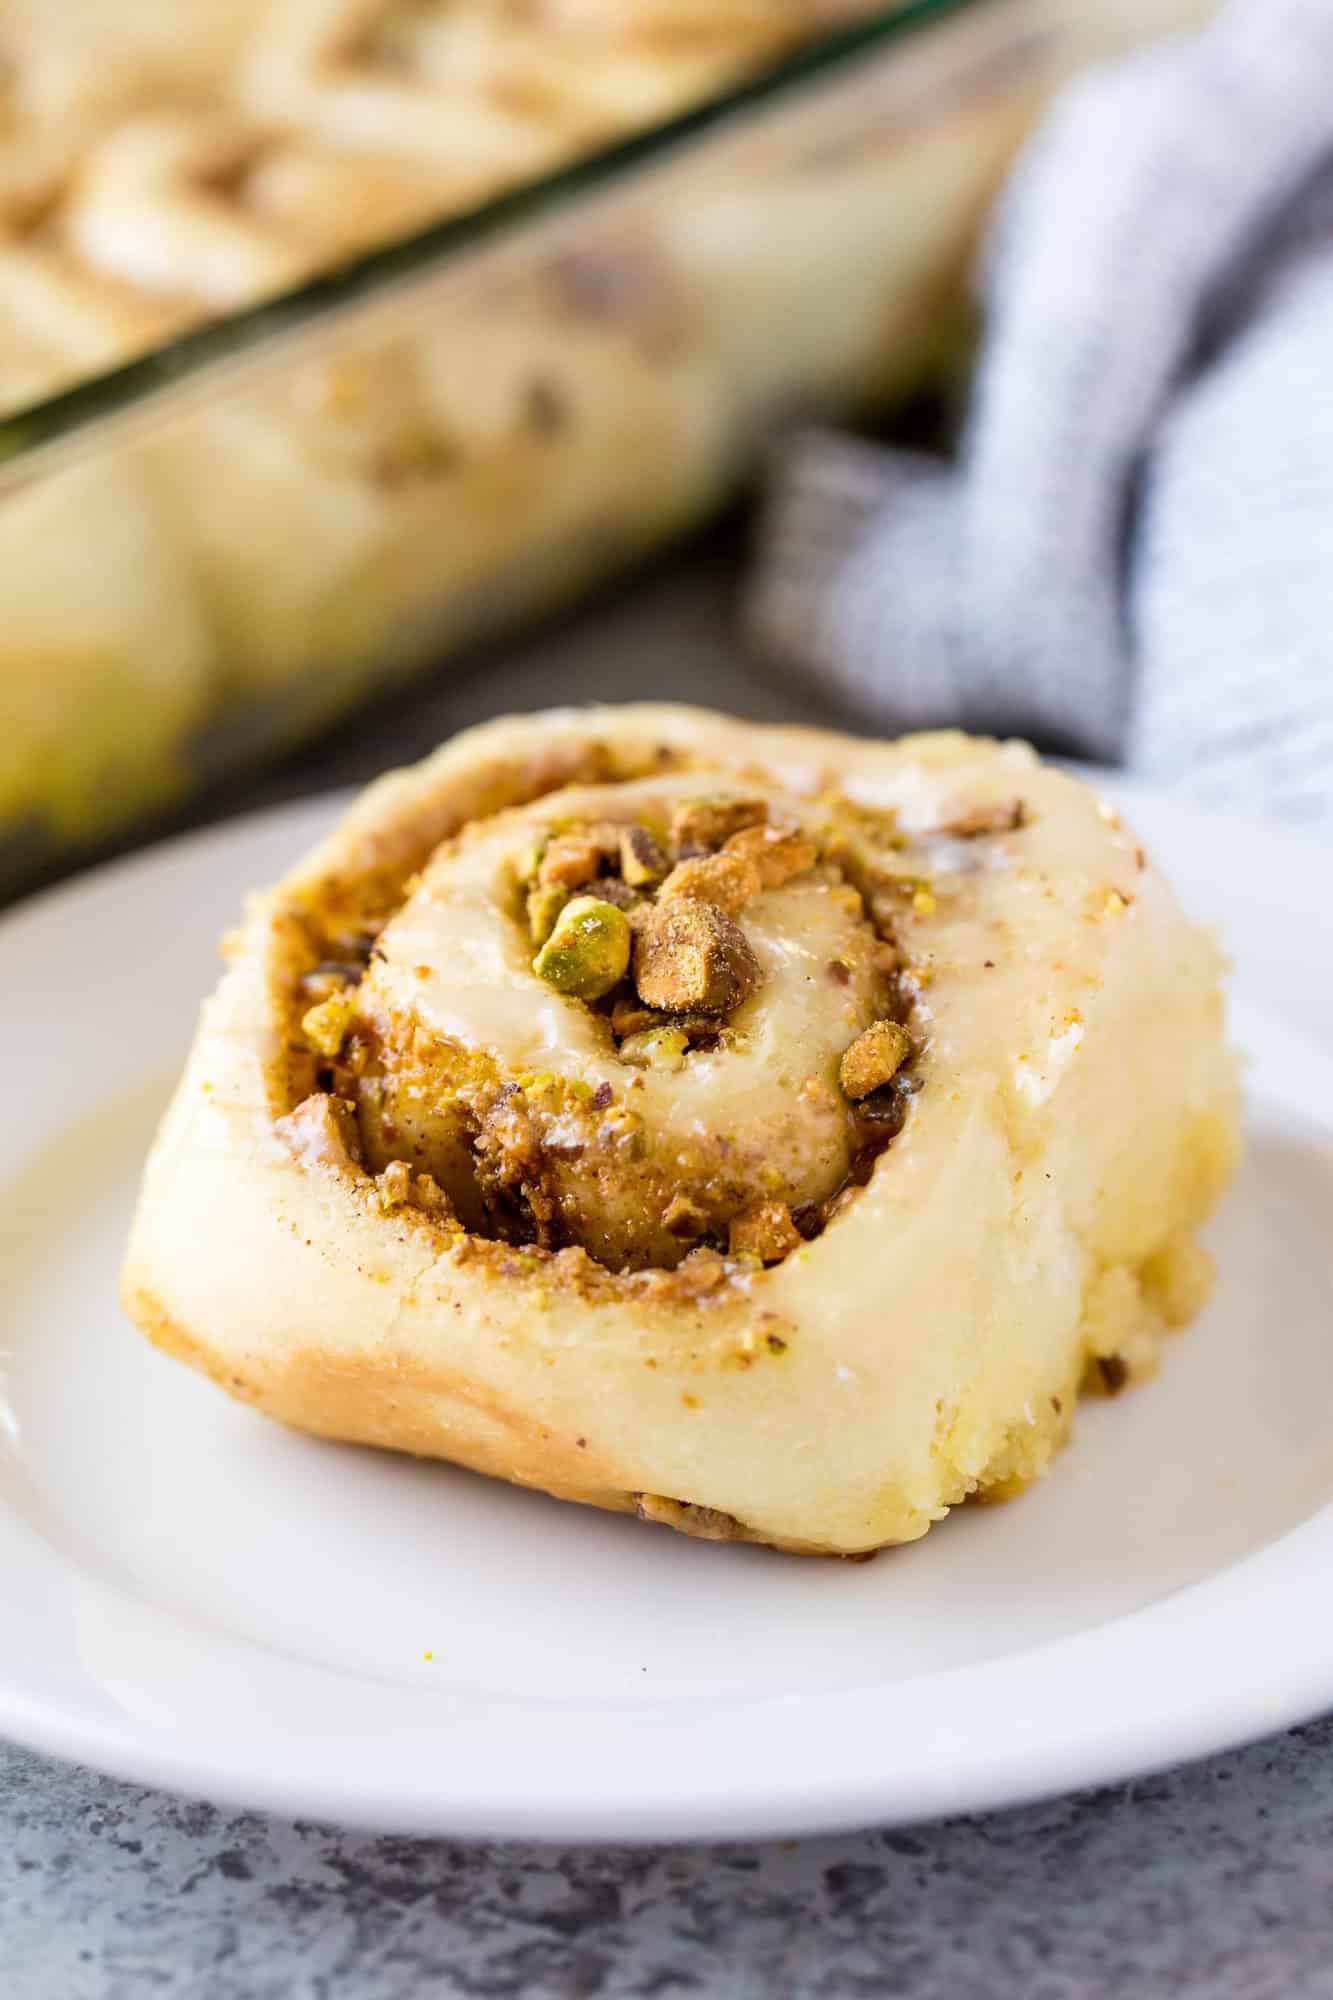 A freshly baked Baklava Cinnamon Roll served on a white plate